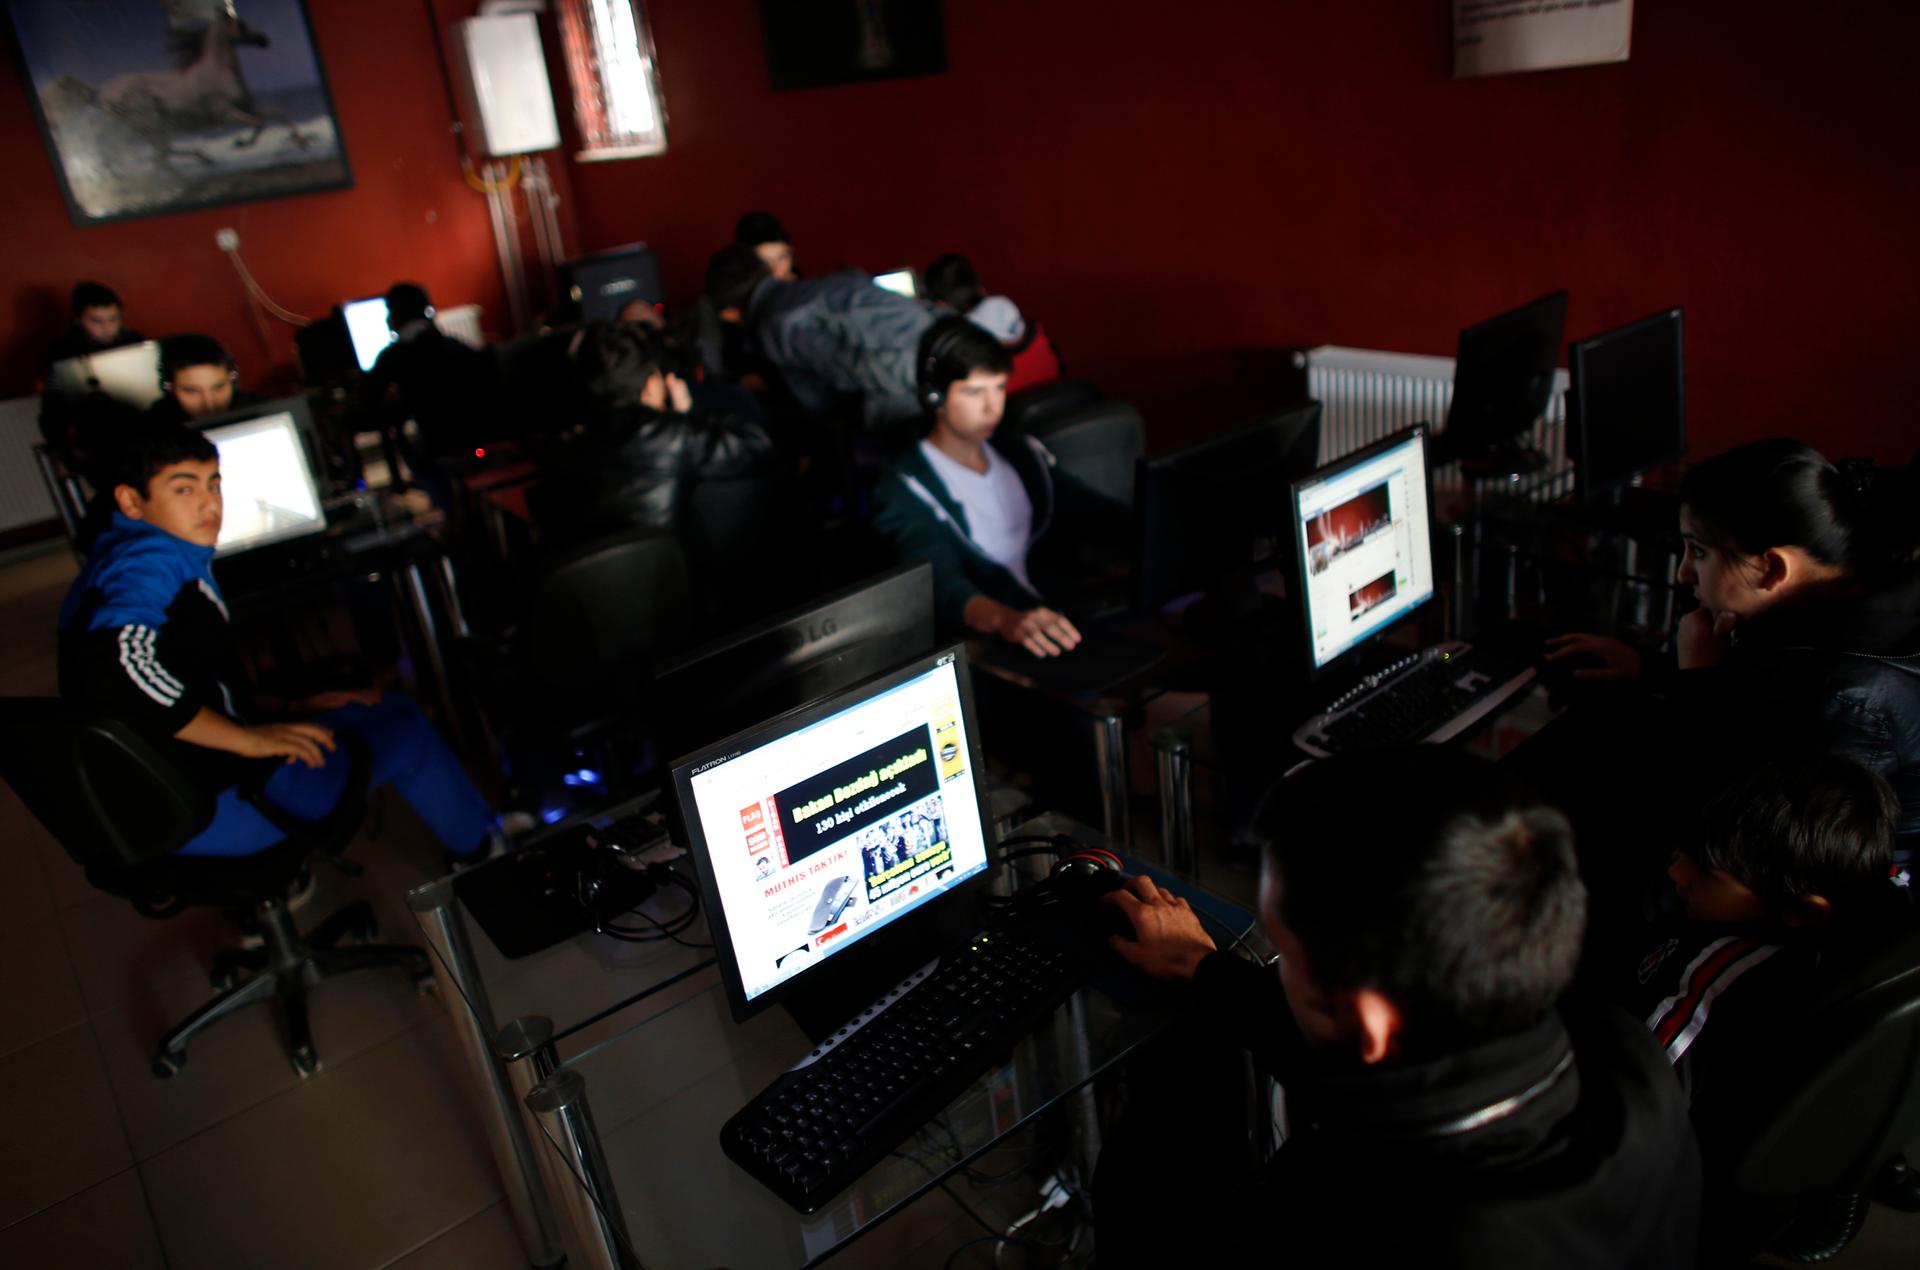 Internet cafes bustle in Ankara, where Turkey's parliament approved a crackdown on online access.